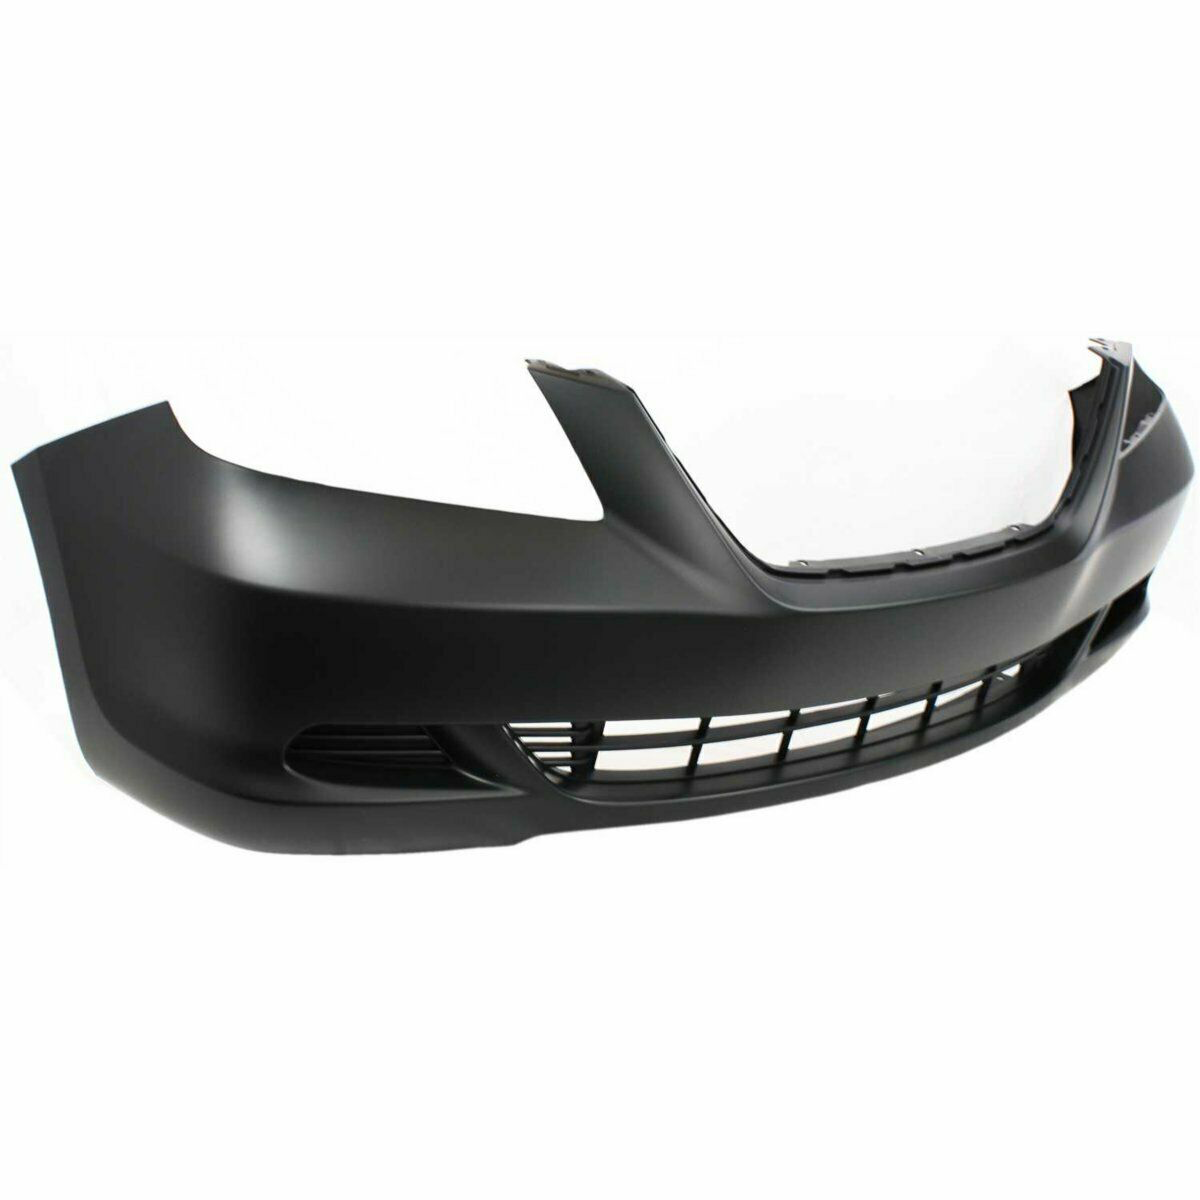 2005-2007 Honda Odyssey (no fog) Front Bumper Painted to Match